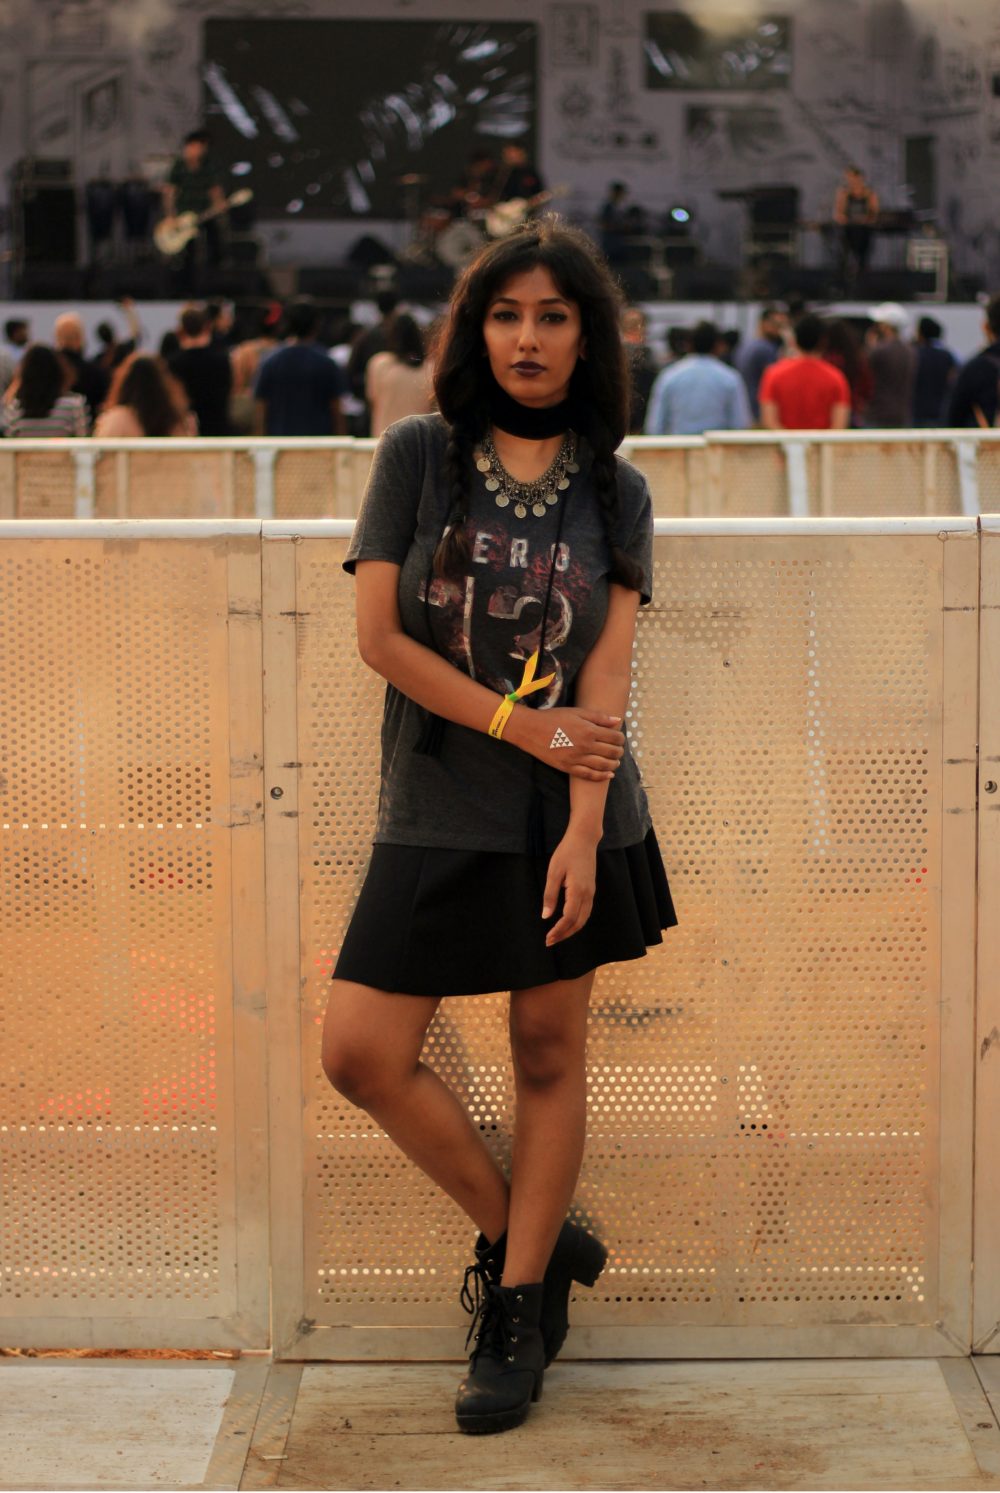 music festival ; bacardi nh7 weekender ; nh7 ; music ; rock artists ; music festival looks ; street style ; street fashion ; fashion ; style ; indian blogger ; Hyderabad blogger ; Hyderabad music ; aeropostale ; yoins ; bohemian ; free spirited ; Outfit ; ootd ; music festival outfit ; lookbook ; metal jewelry ; zaful ; bacardi ; farhan akhtar live ; grunge ; naznin suhaer ; I Dress for the Applause